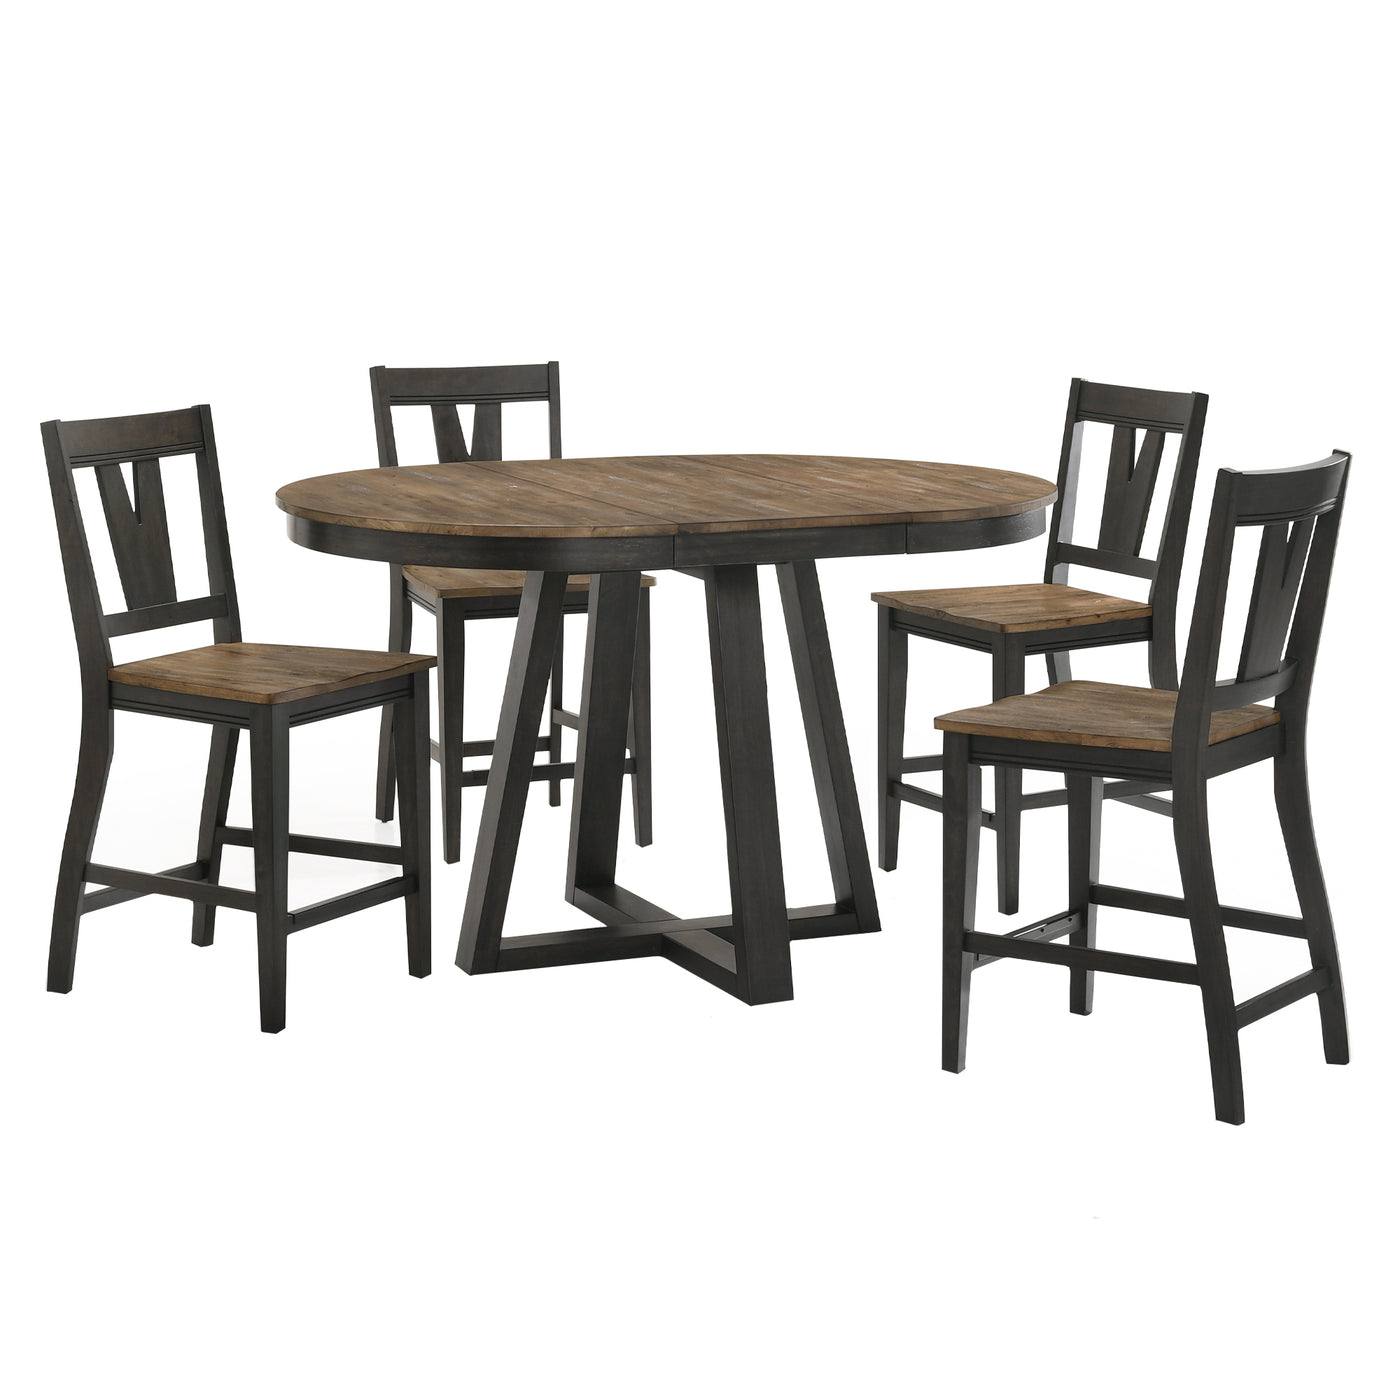 Addie 5-Piece Extendable Counter Height Dining Set with Splat-Back Stools - Brown